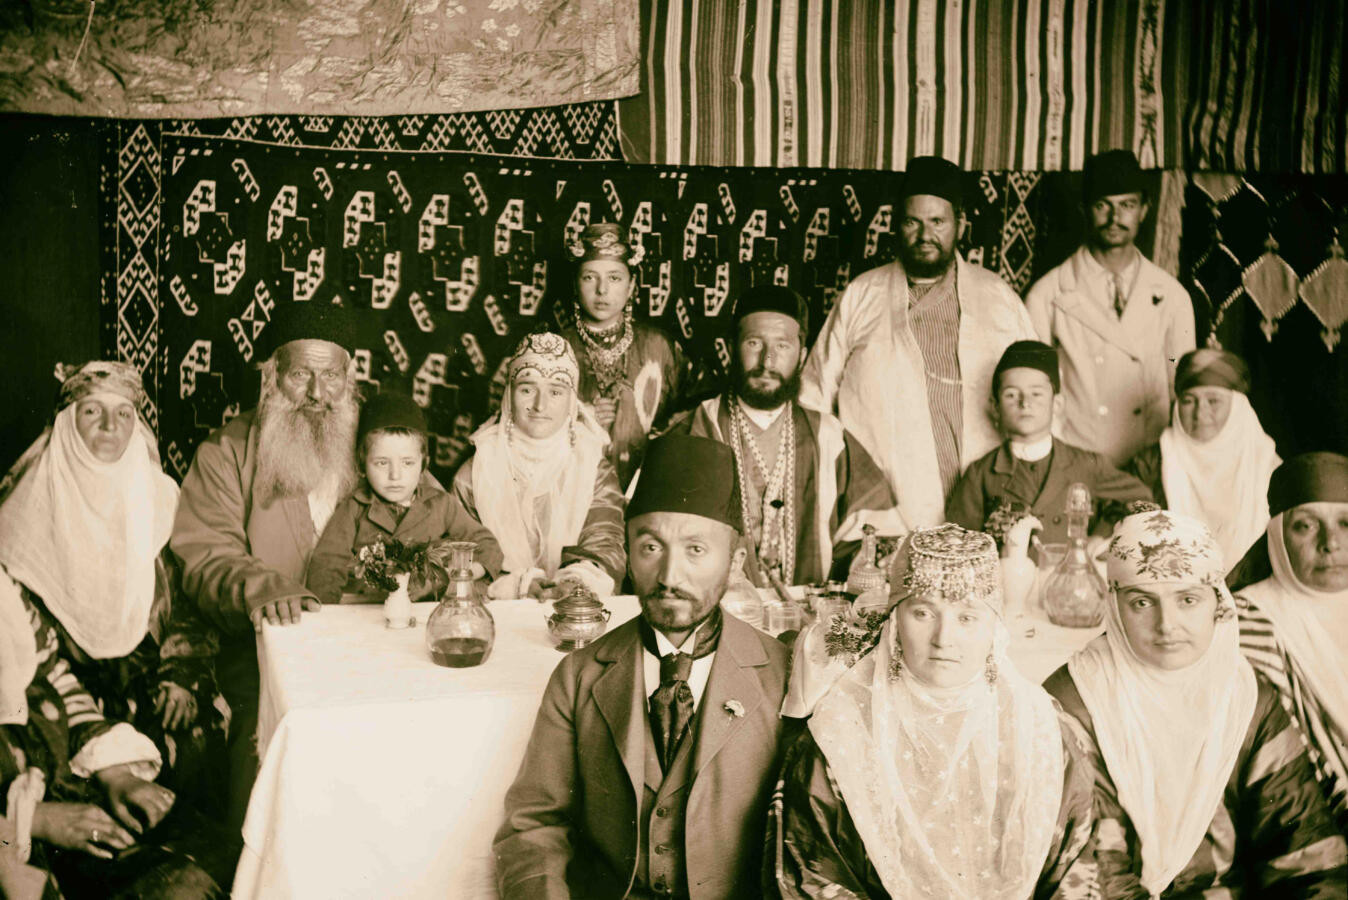 Sepia photograph of Bukharan Jews in a sukkah in traditional dress.